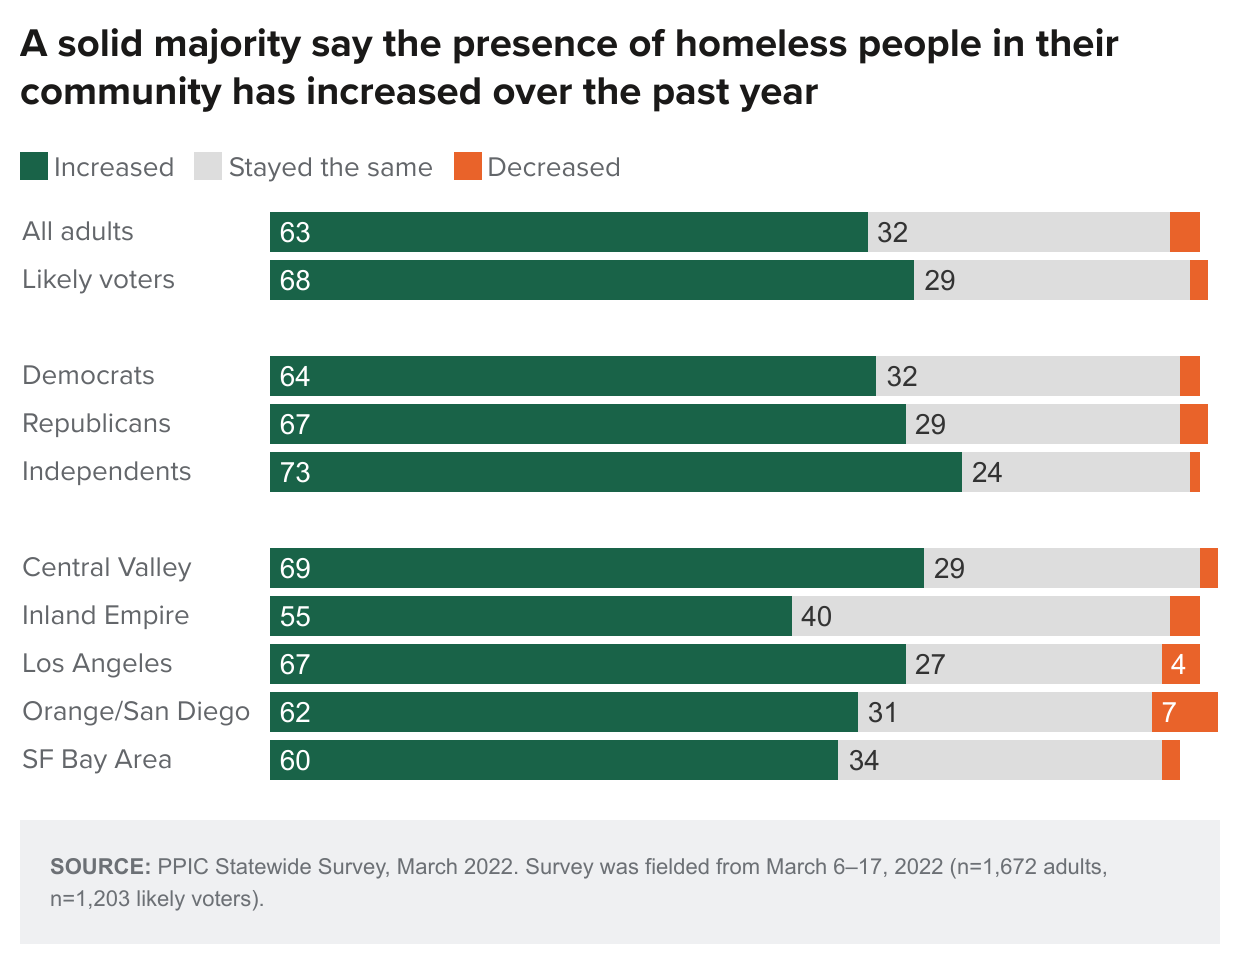 figure - A solid majority say the presence of homeless people in their community has increased over the past year